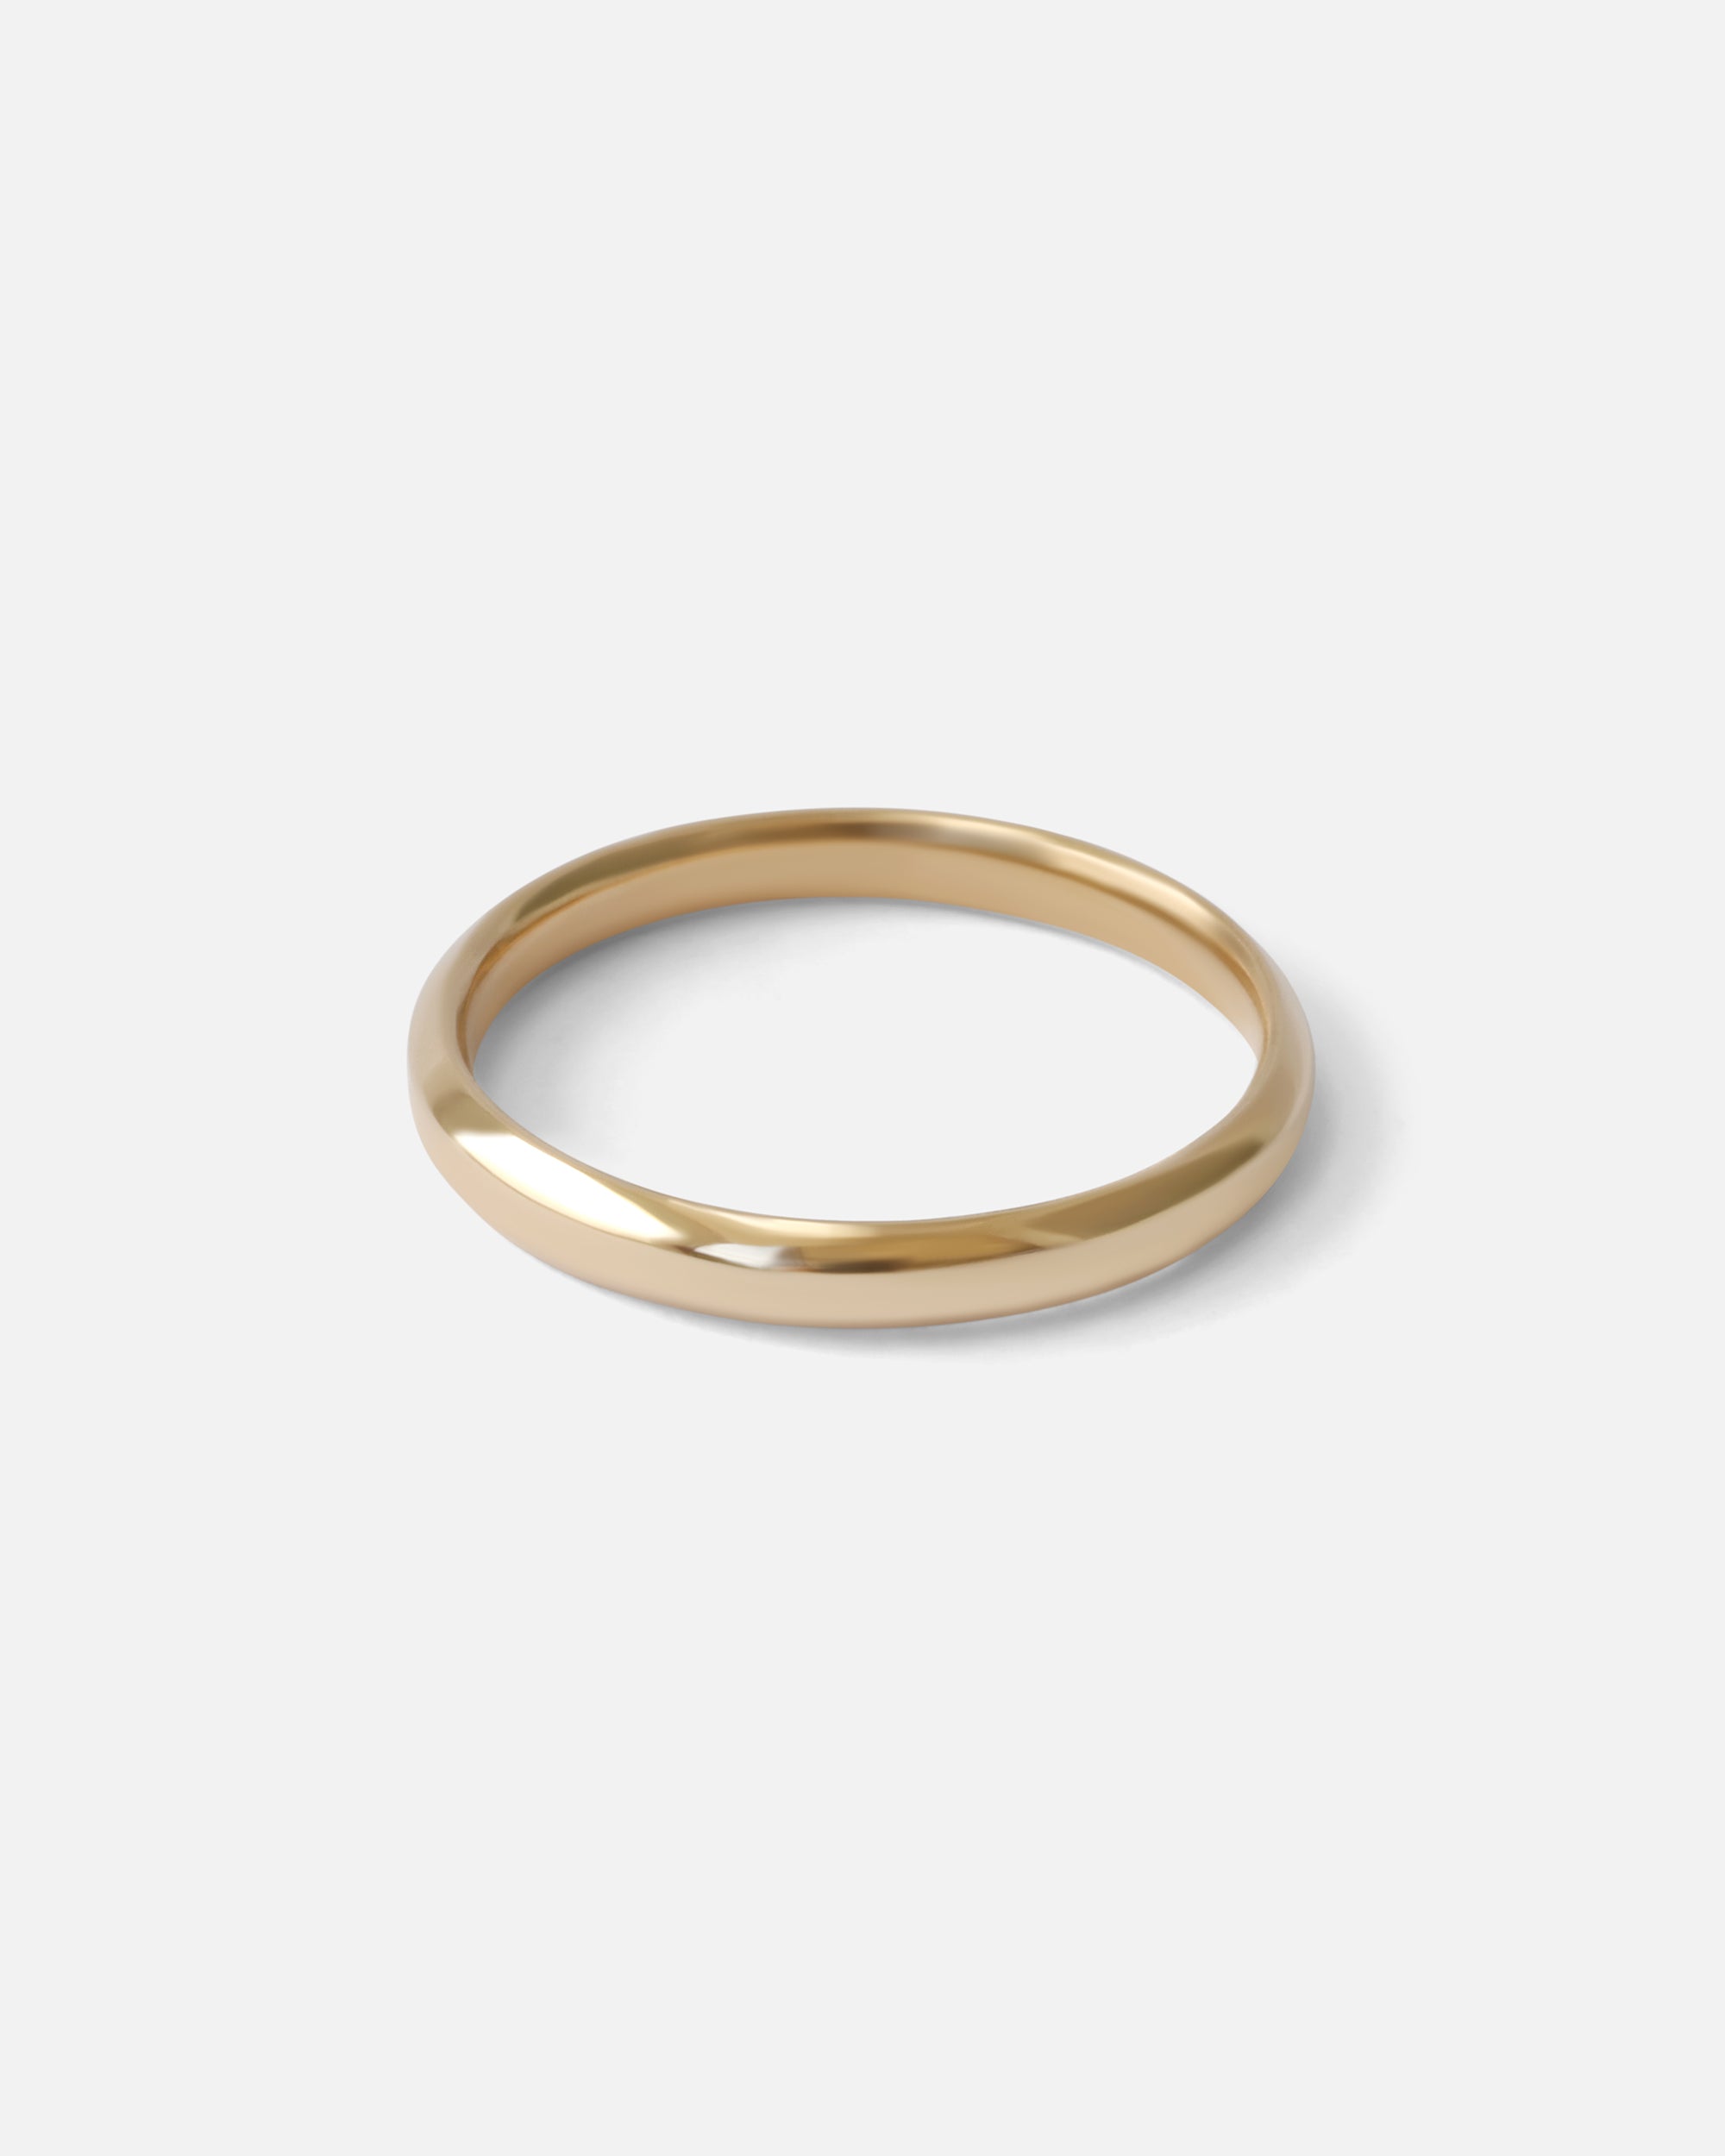 Hex Band / Polished By O Channell Designs